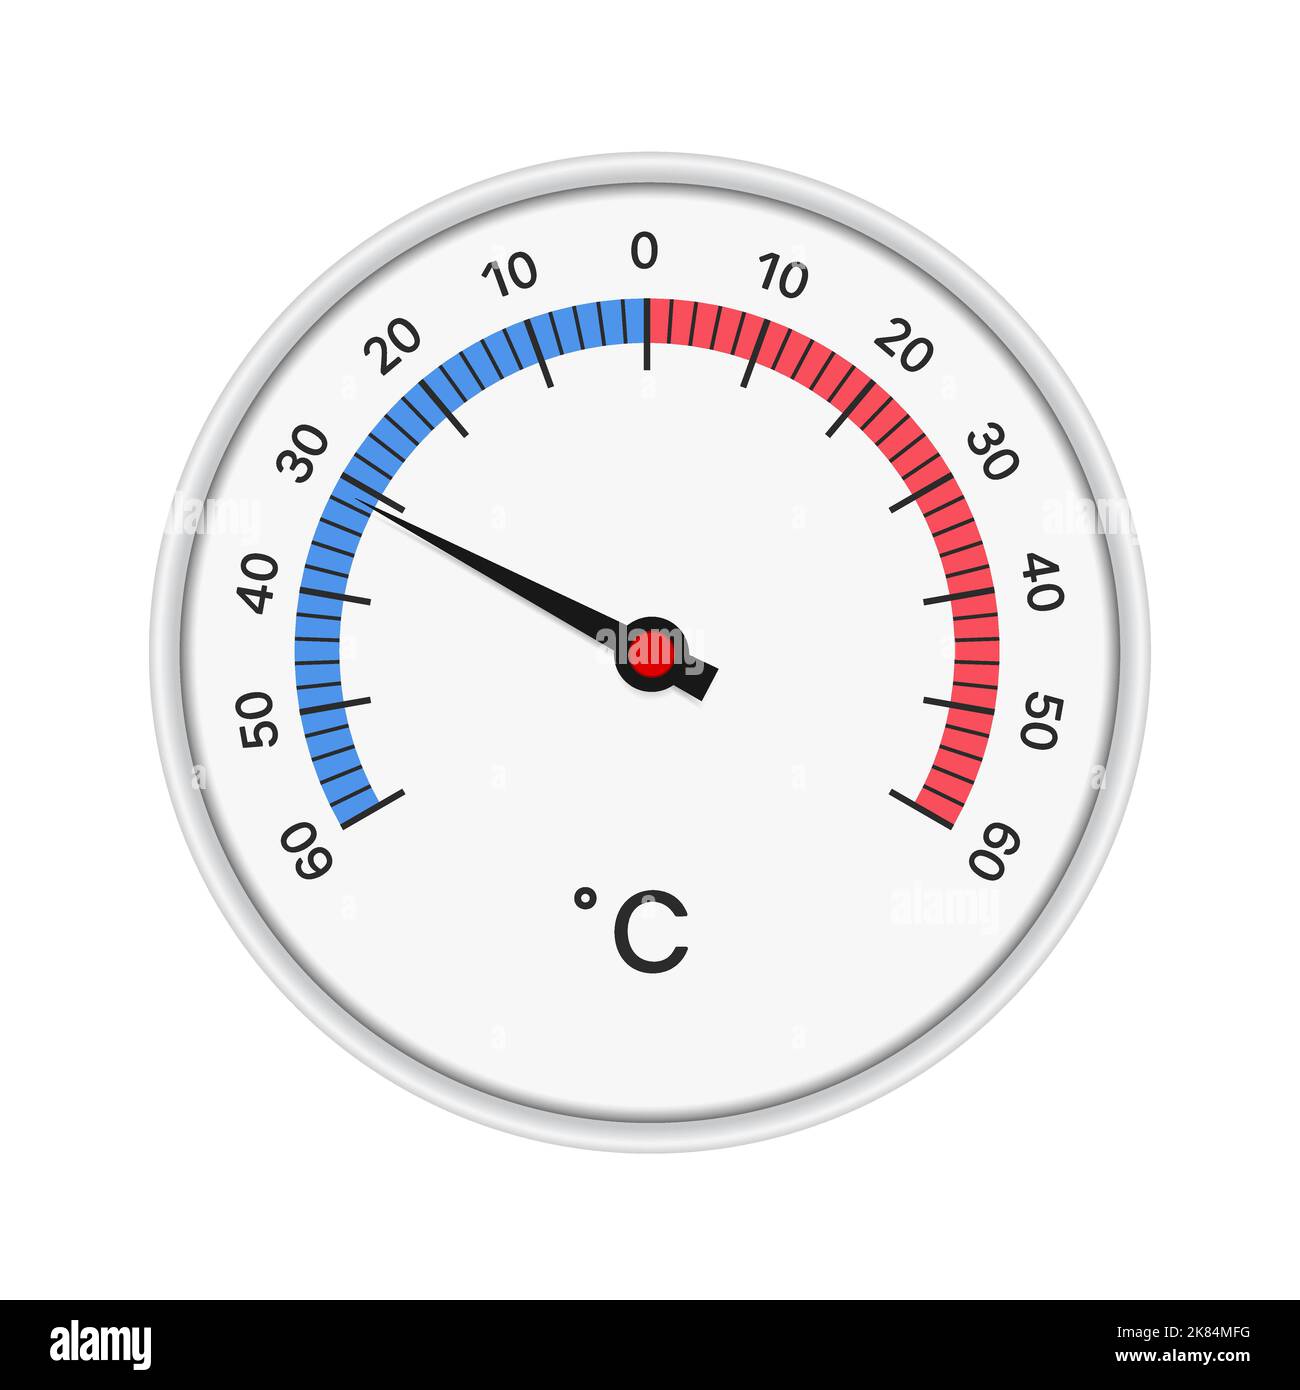 Realistic illustration of a round thermometer with a white plastic circular frame. Arrow for measuring temperature and scale of red and blue colors - Stock Vector